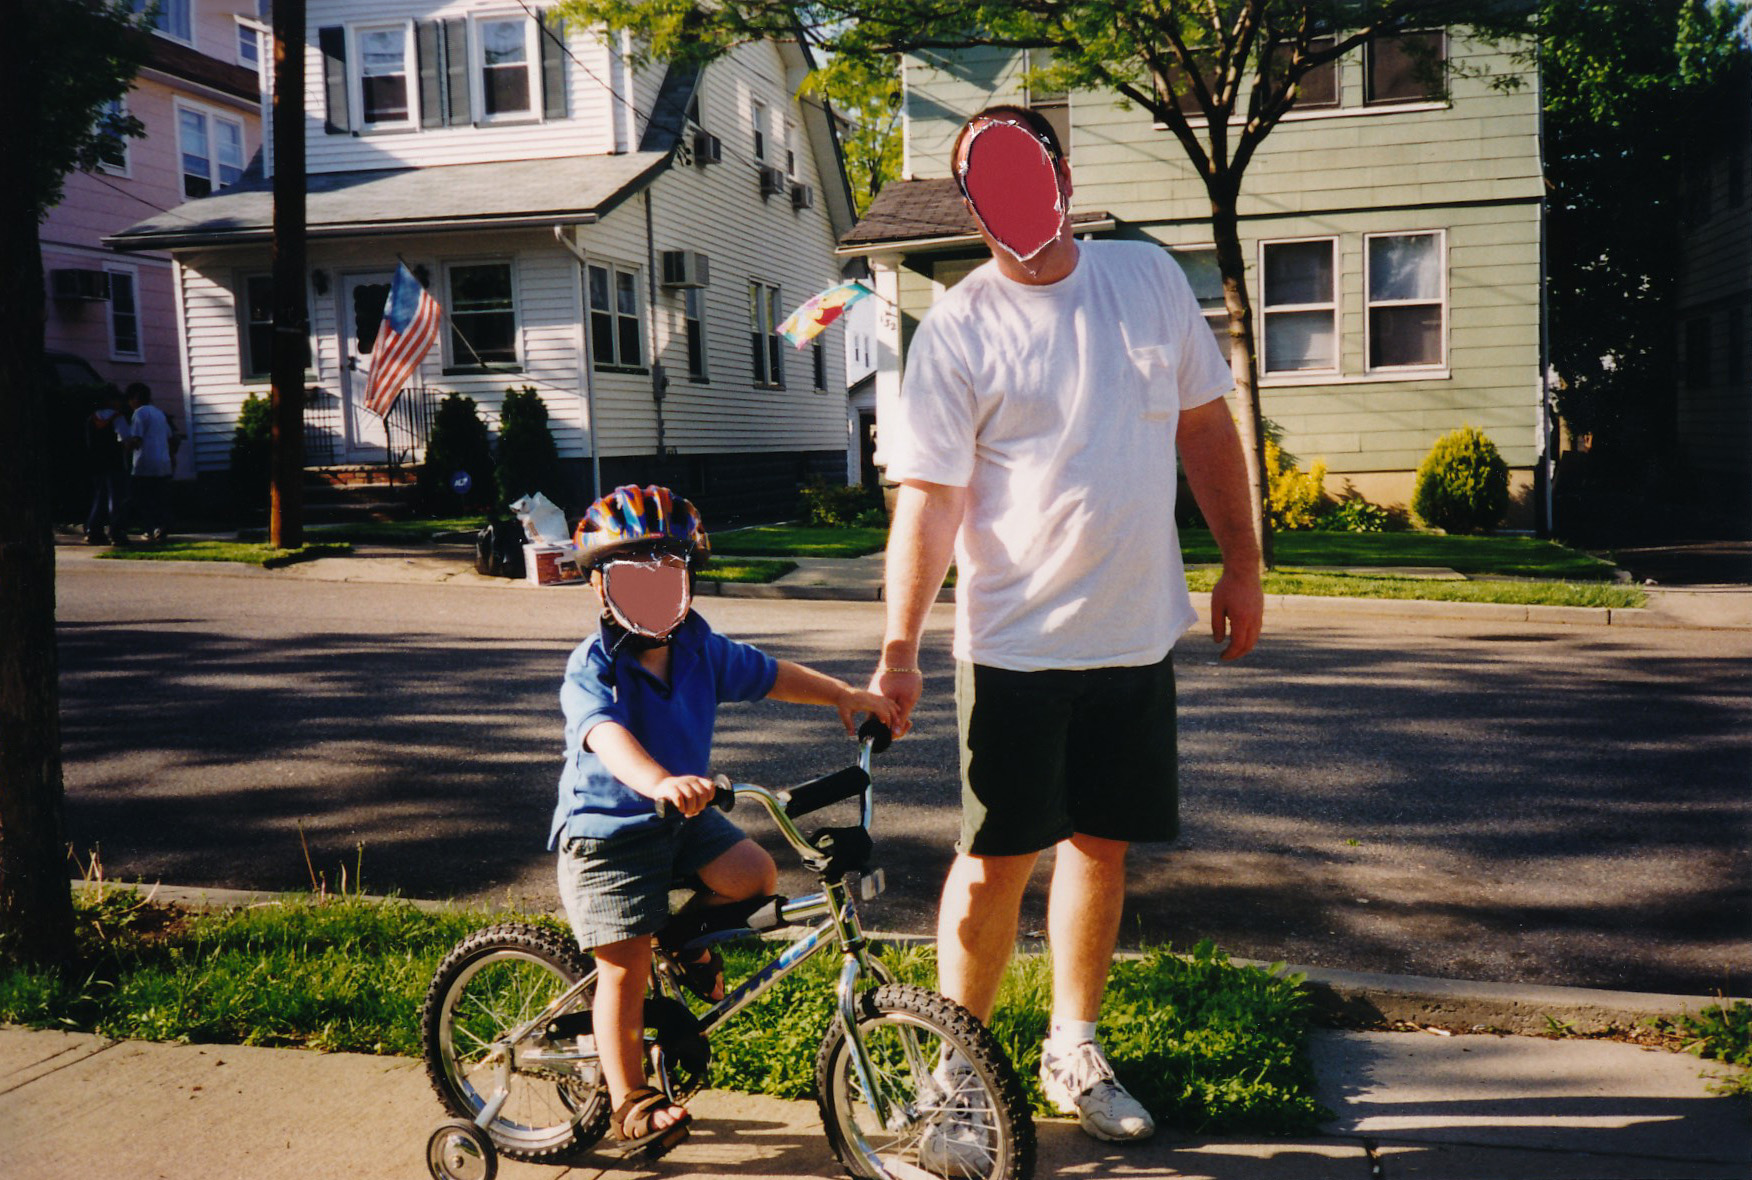 Me and dad and my training wheels, 1999